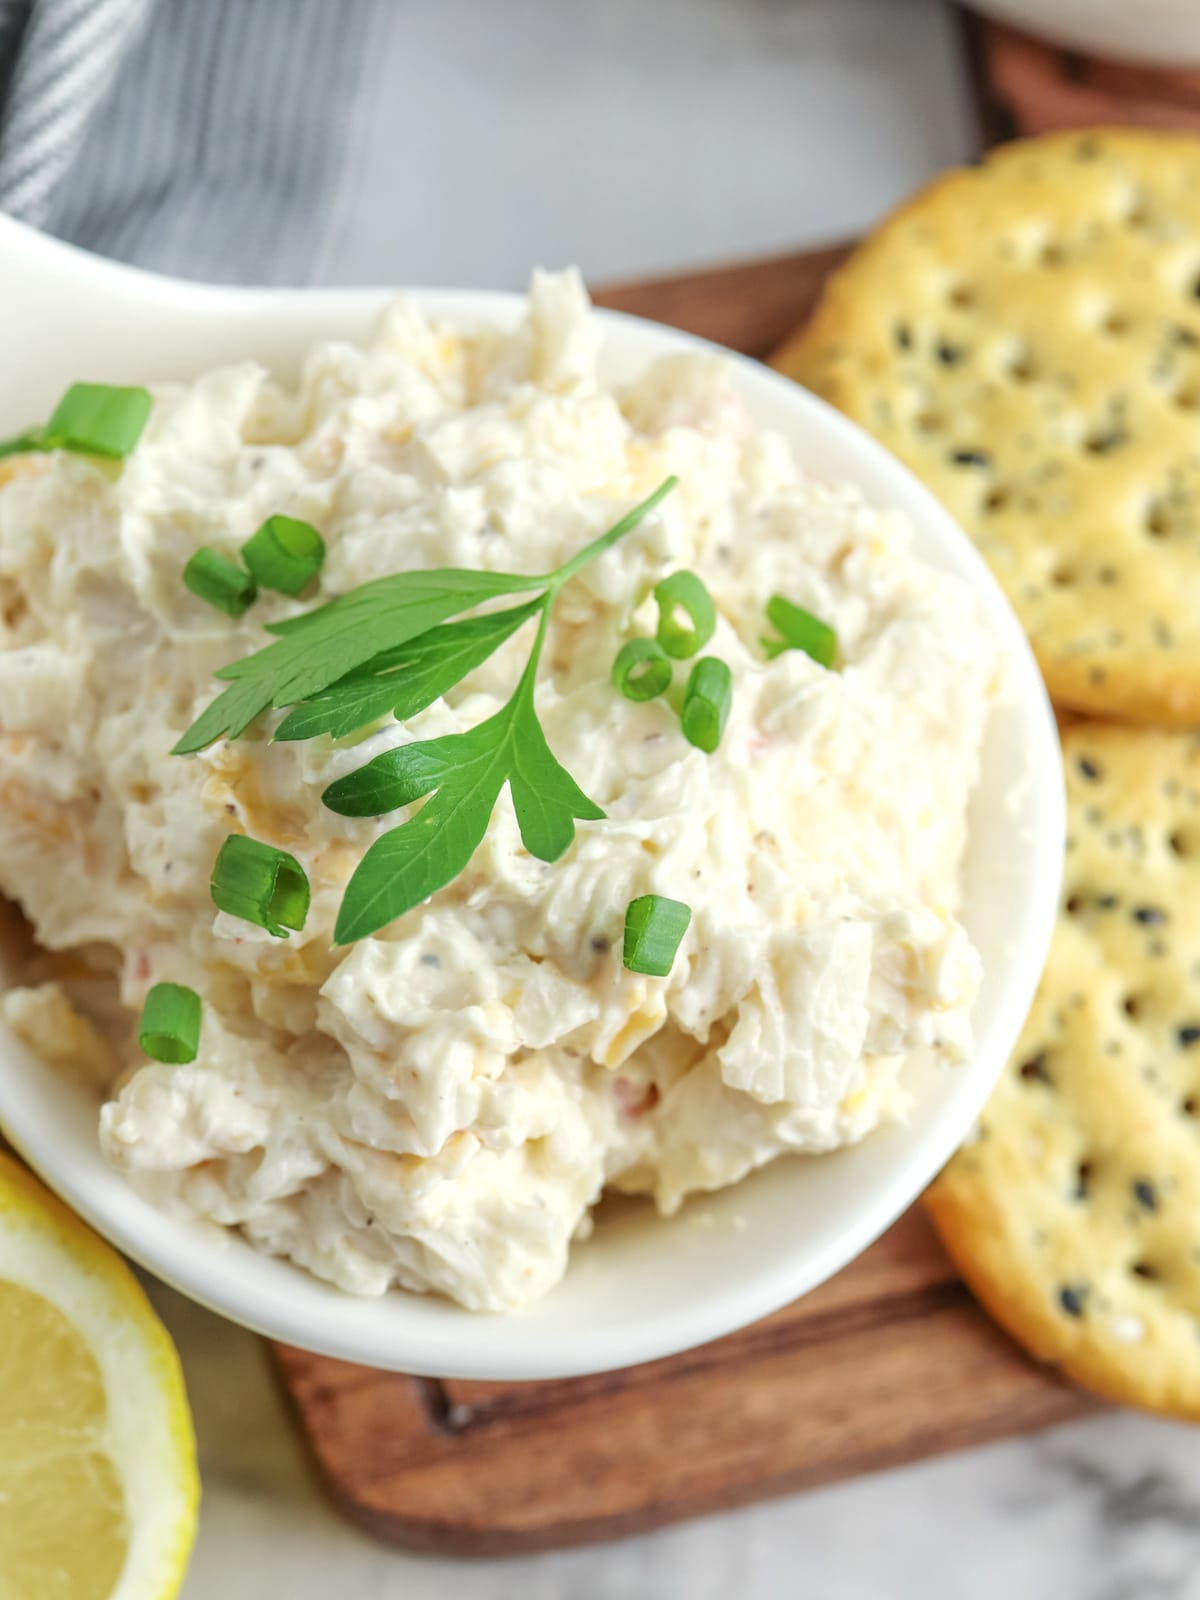 Cold Crab Dip with chives and crackers